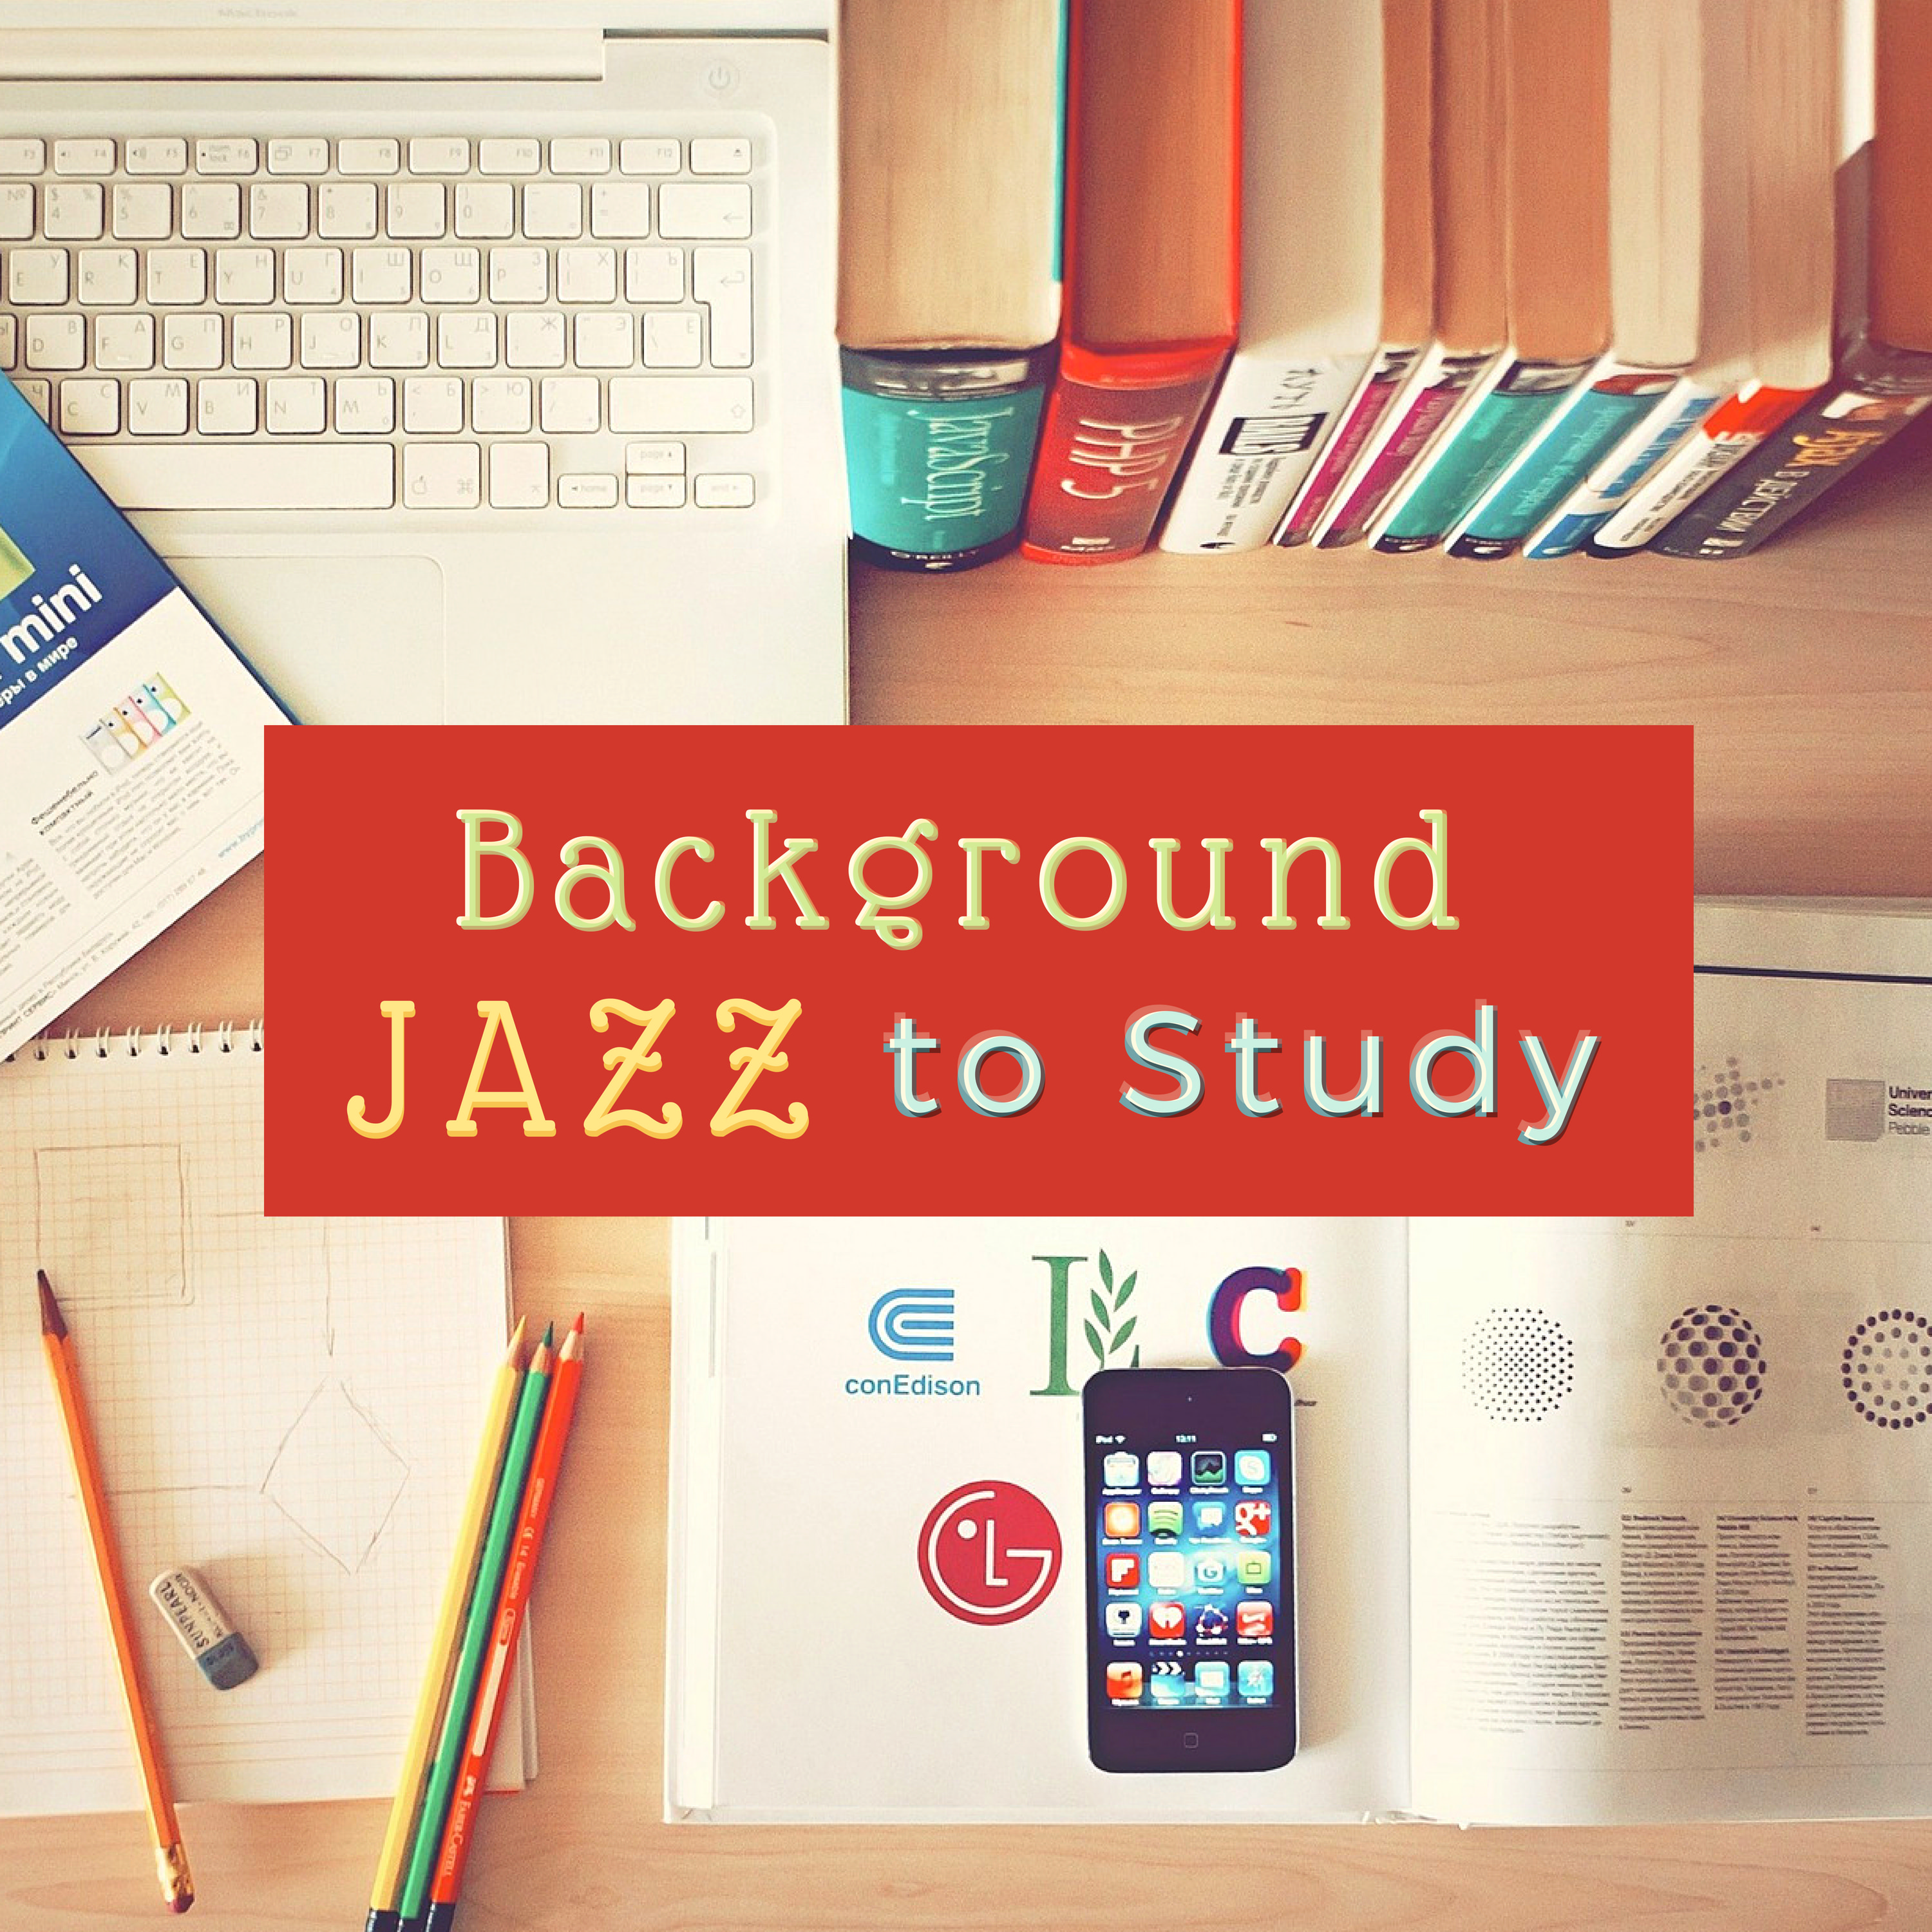 Background Jazz to Study - Deep Concentration Music to Increase Productivity & Brain Power